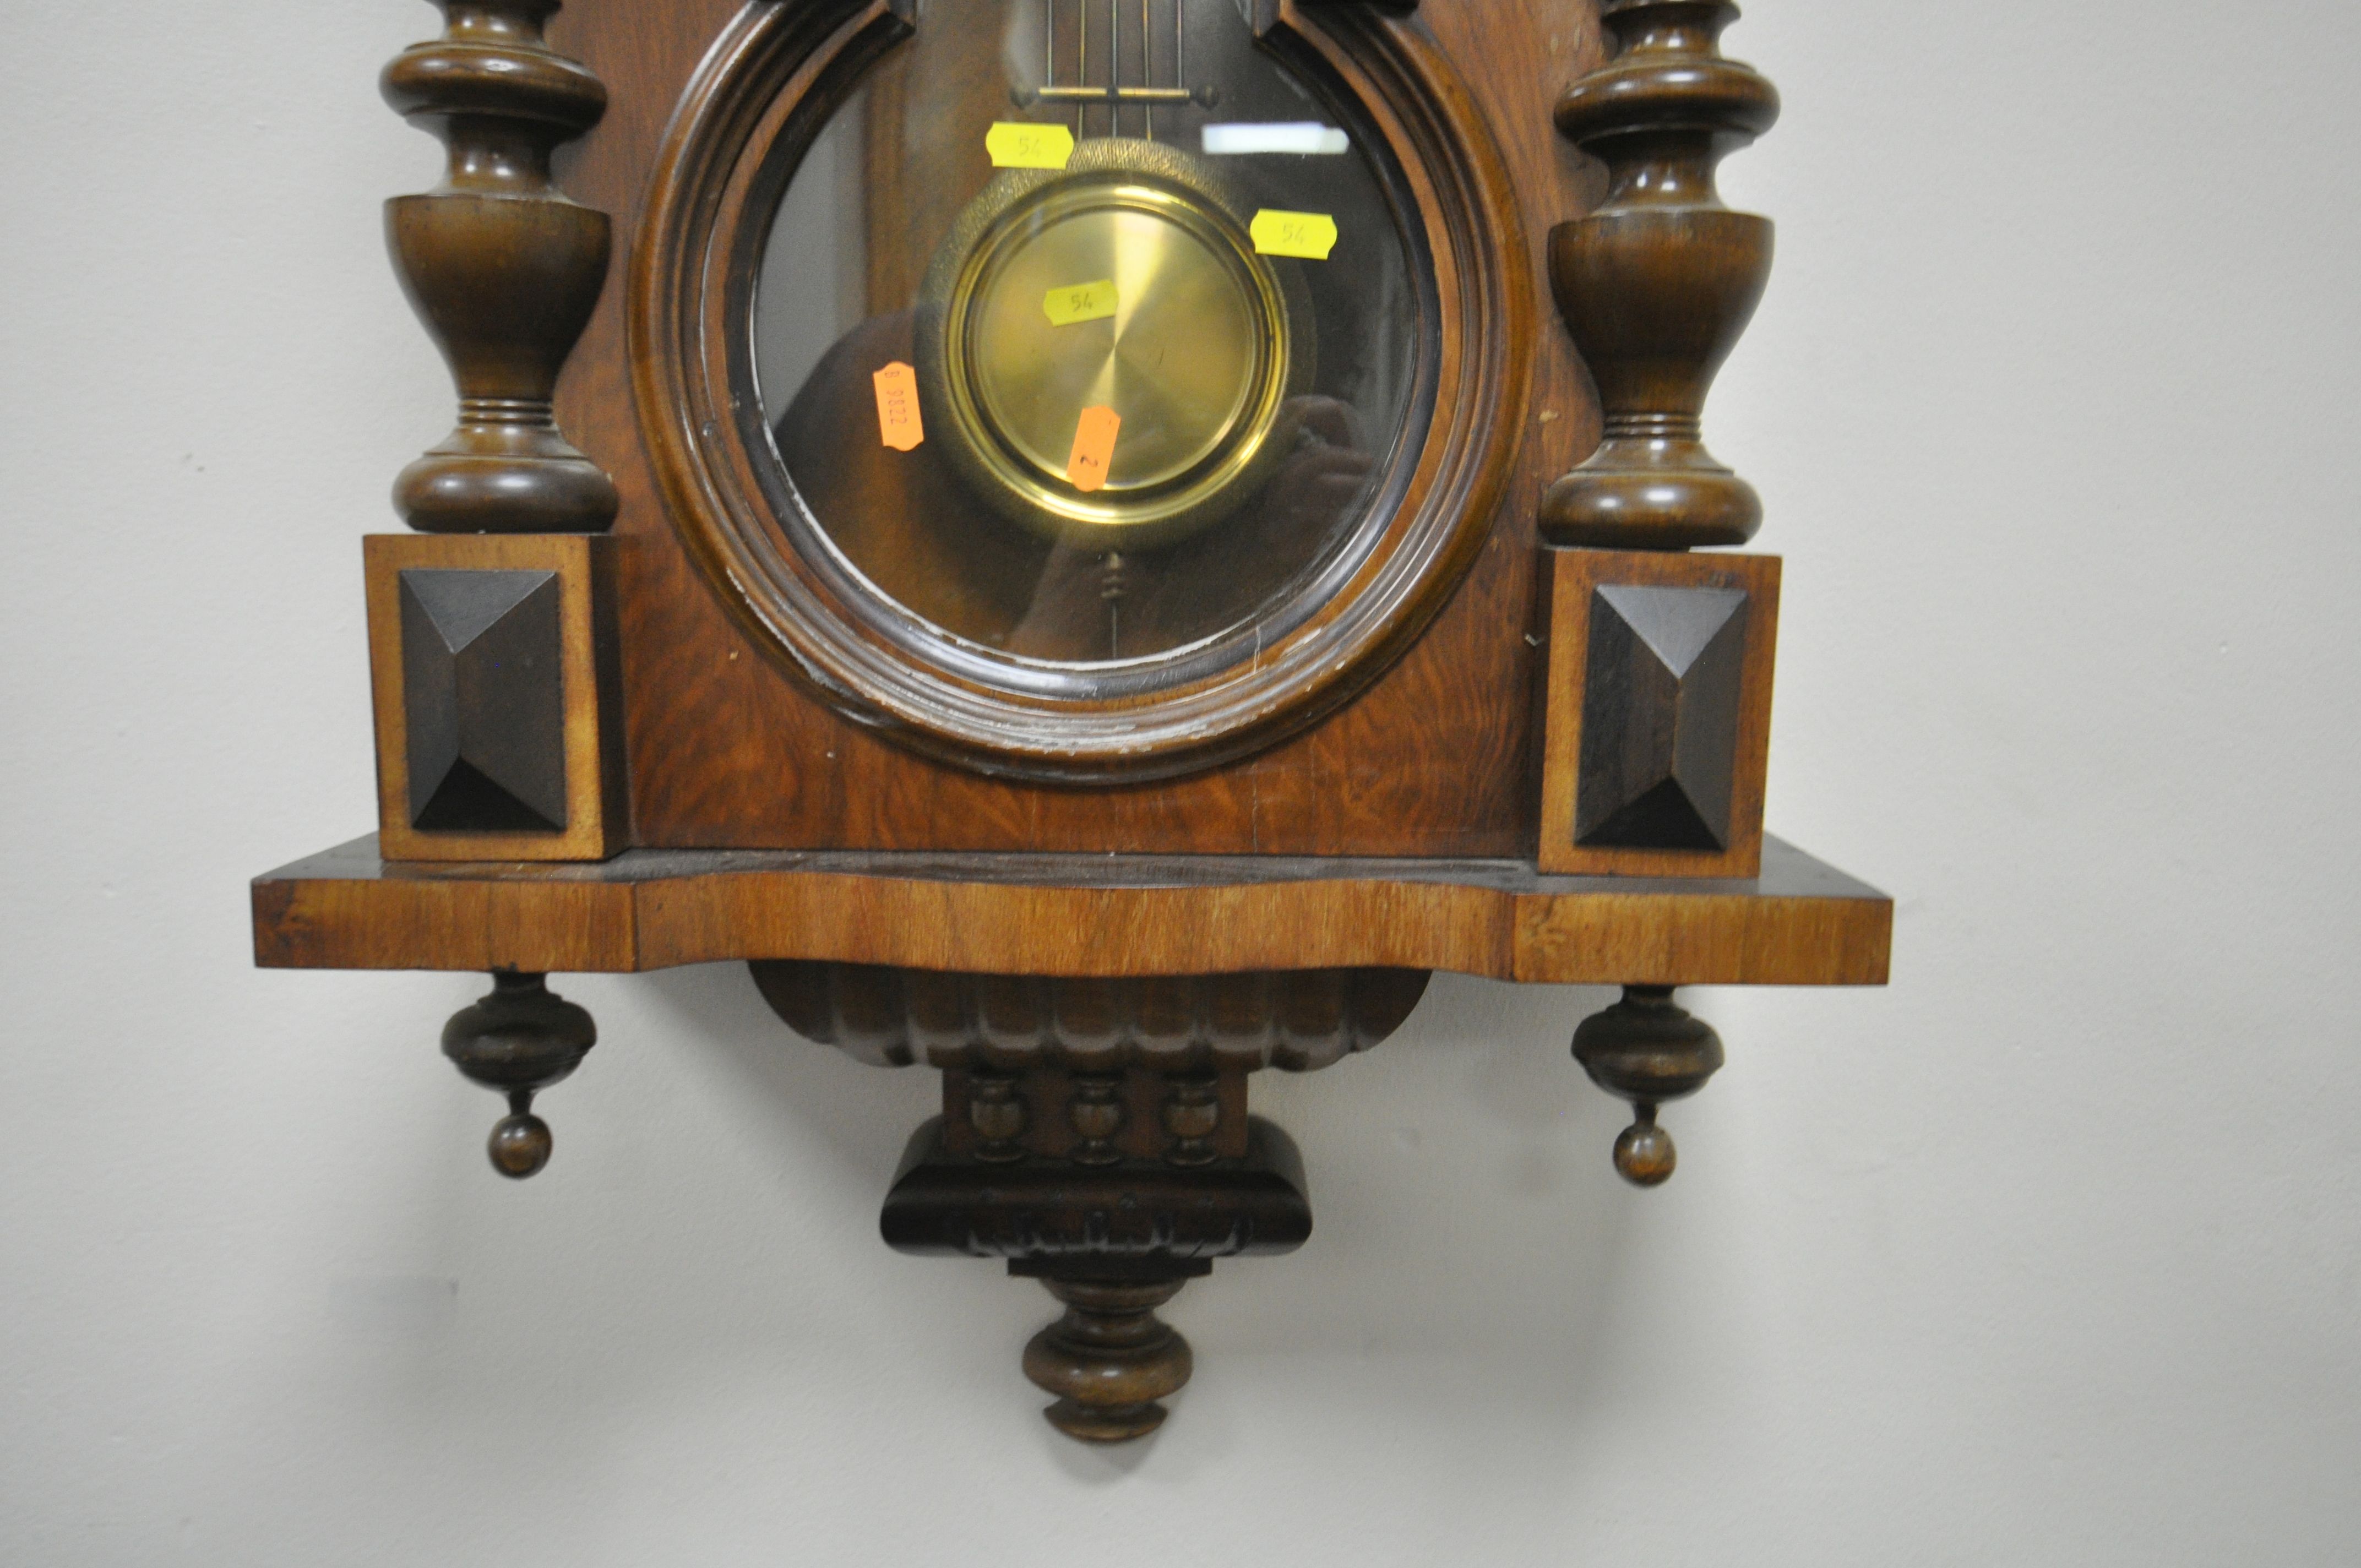 A LATE 19TH CENTURY VIENNA WALL CLOCK, with a resin horse pediment, turned pillars to the doors, - Image 5 of 5